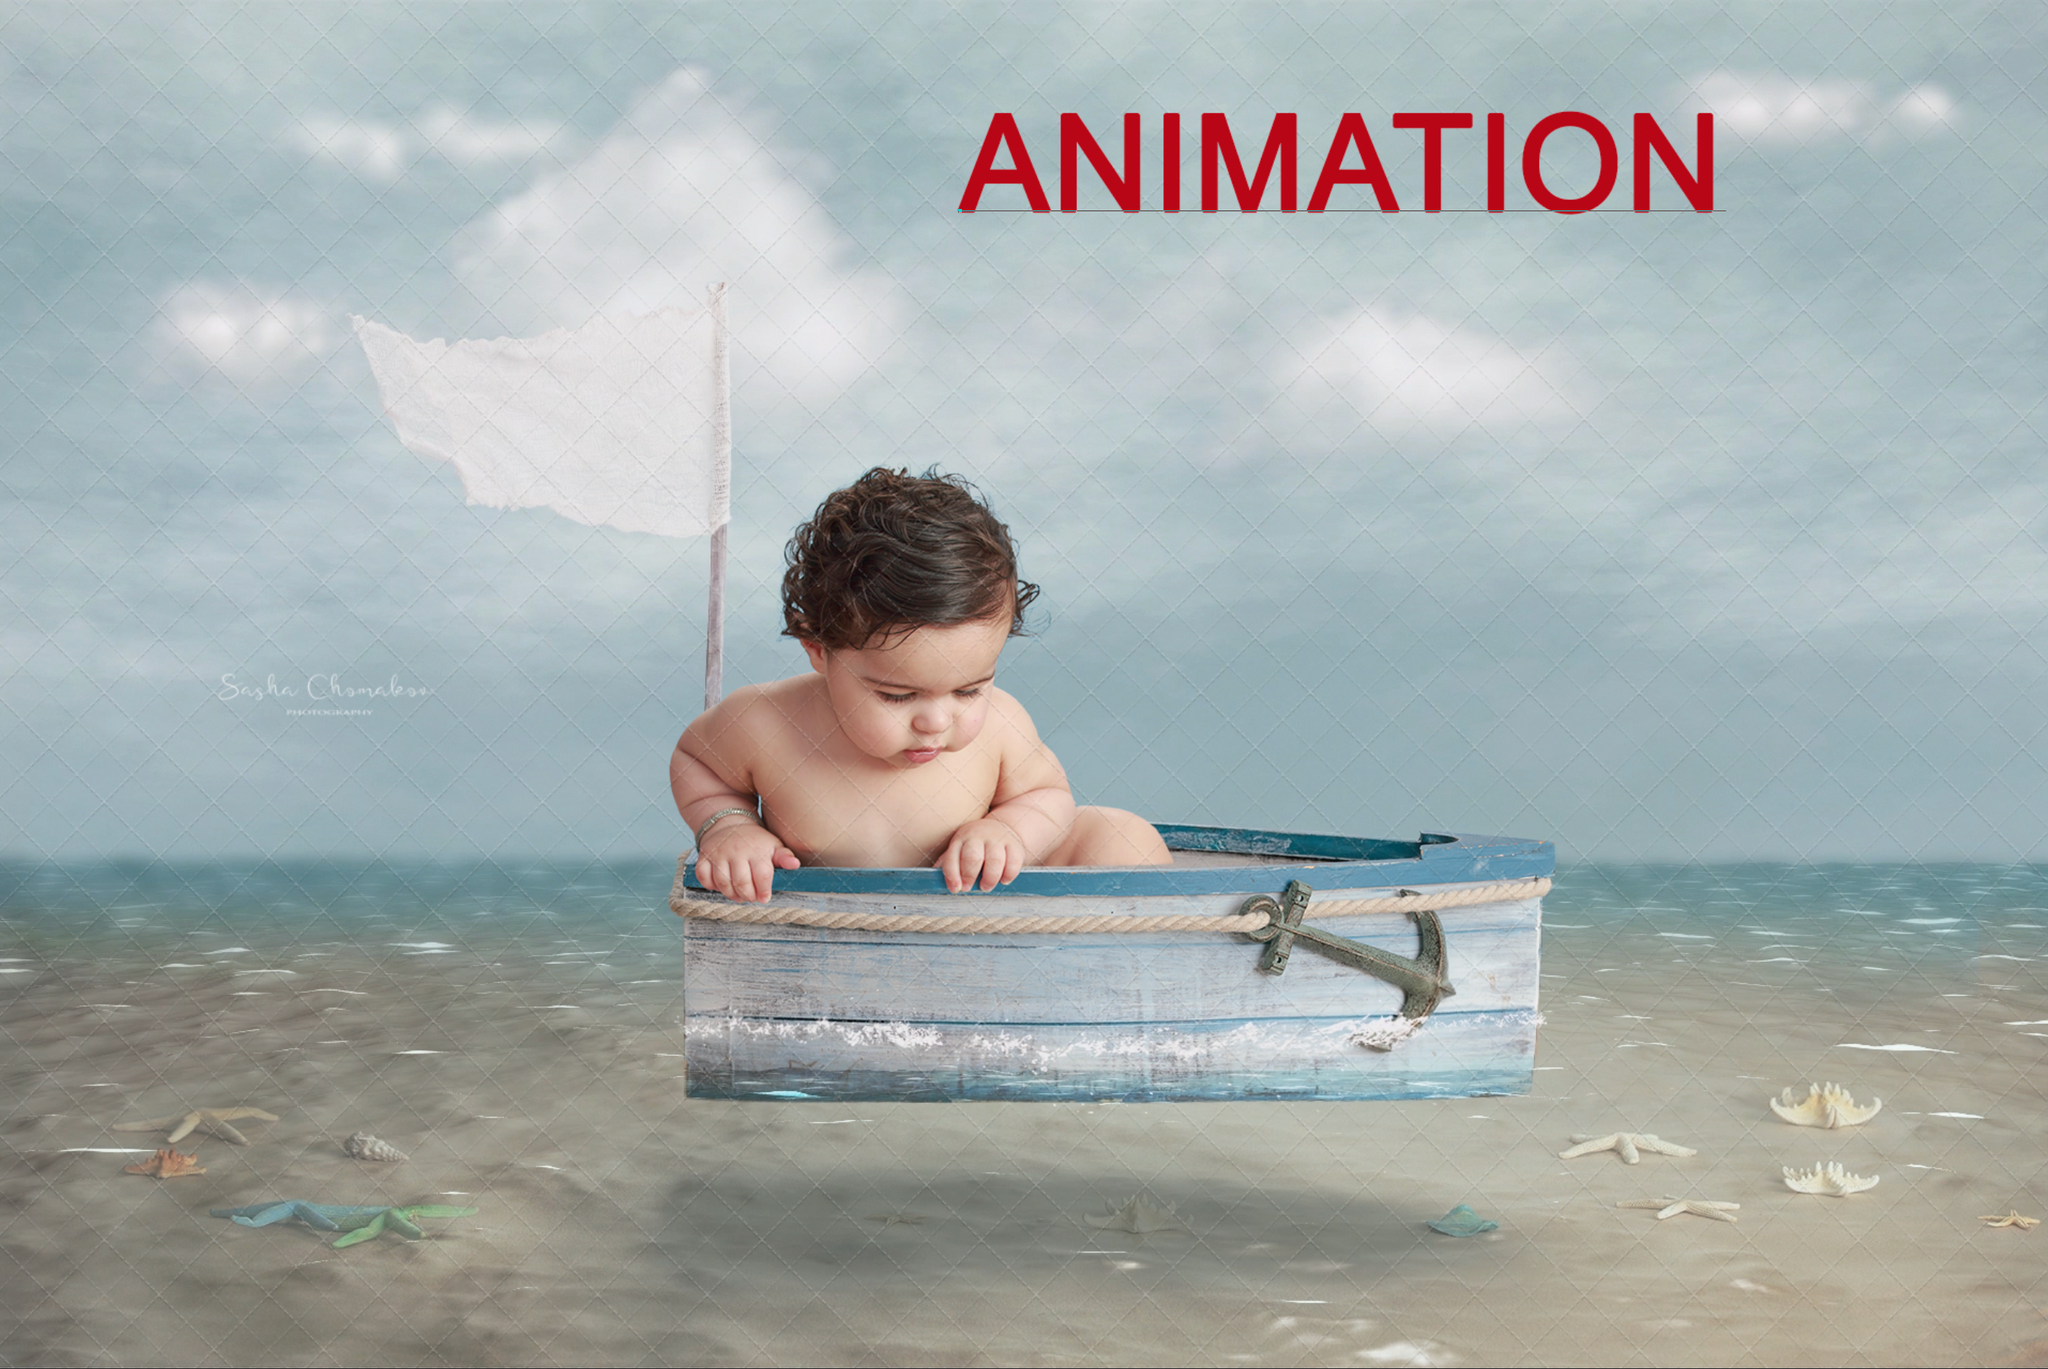 Animated Boat with fish animation